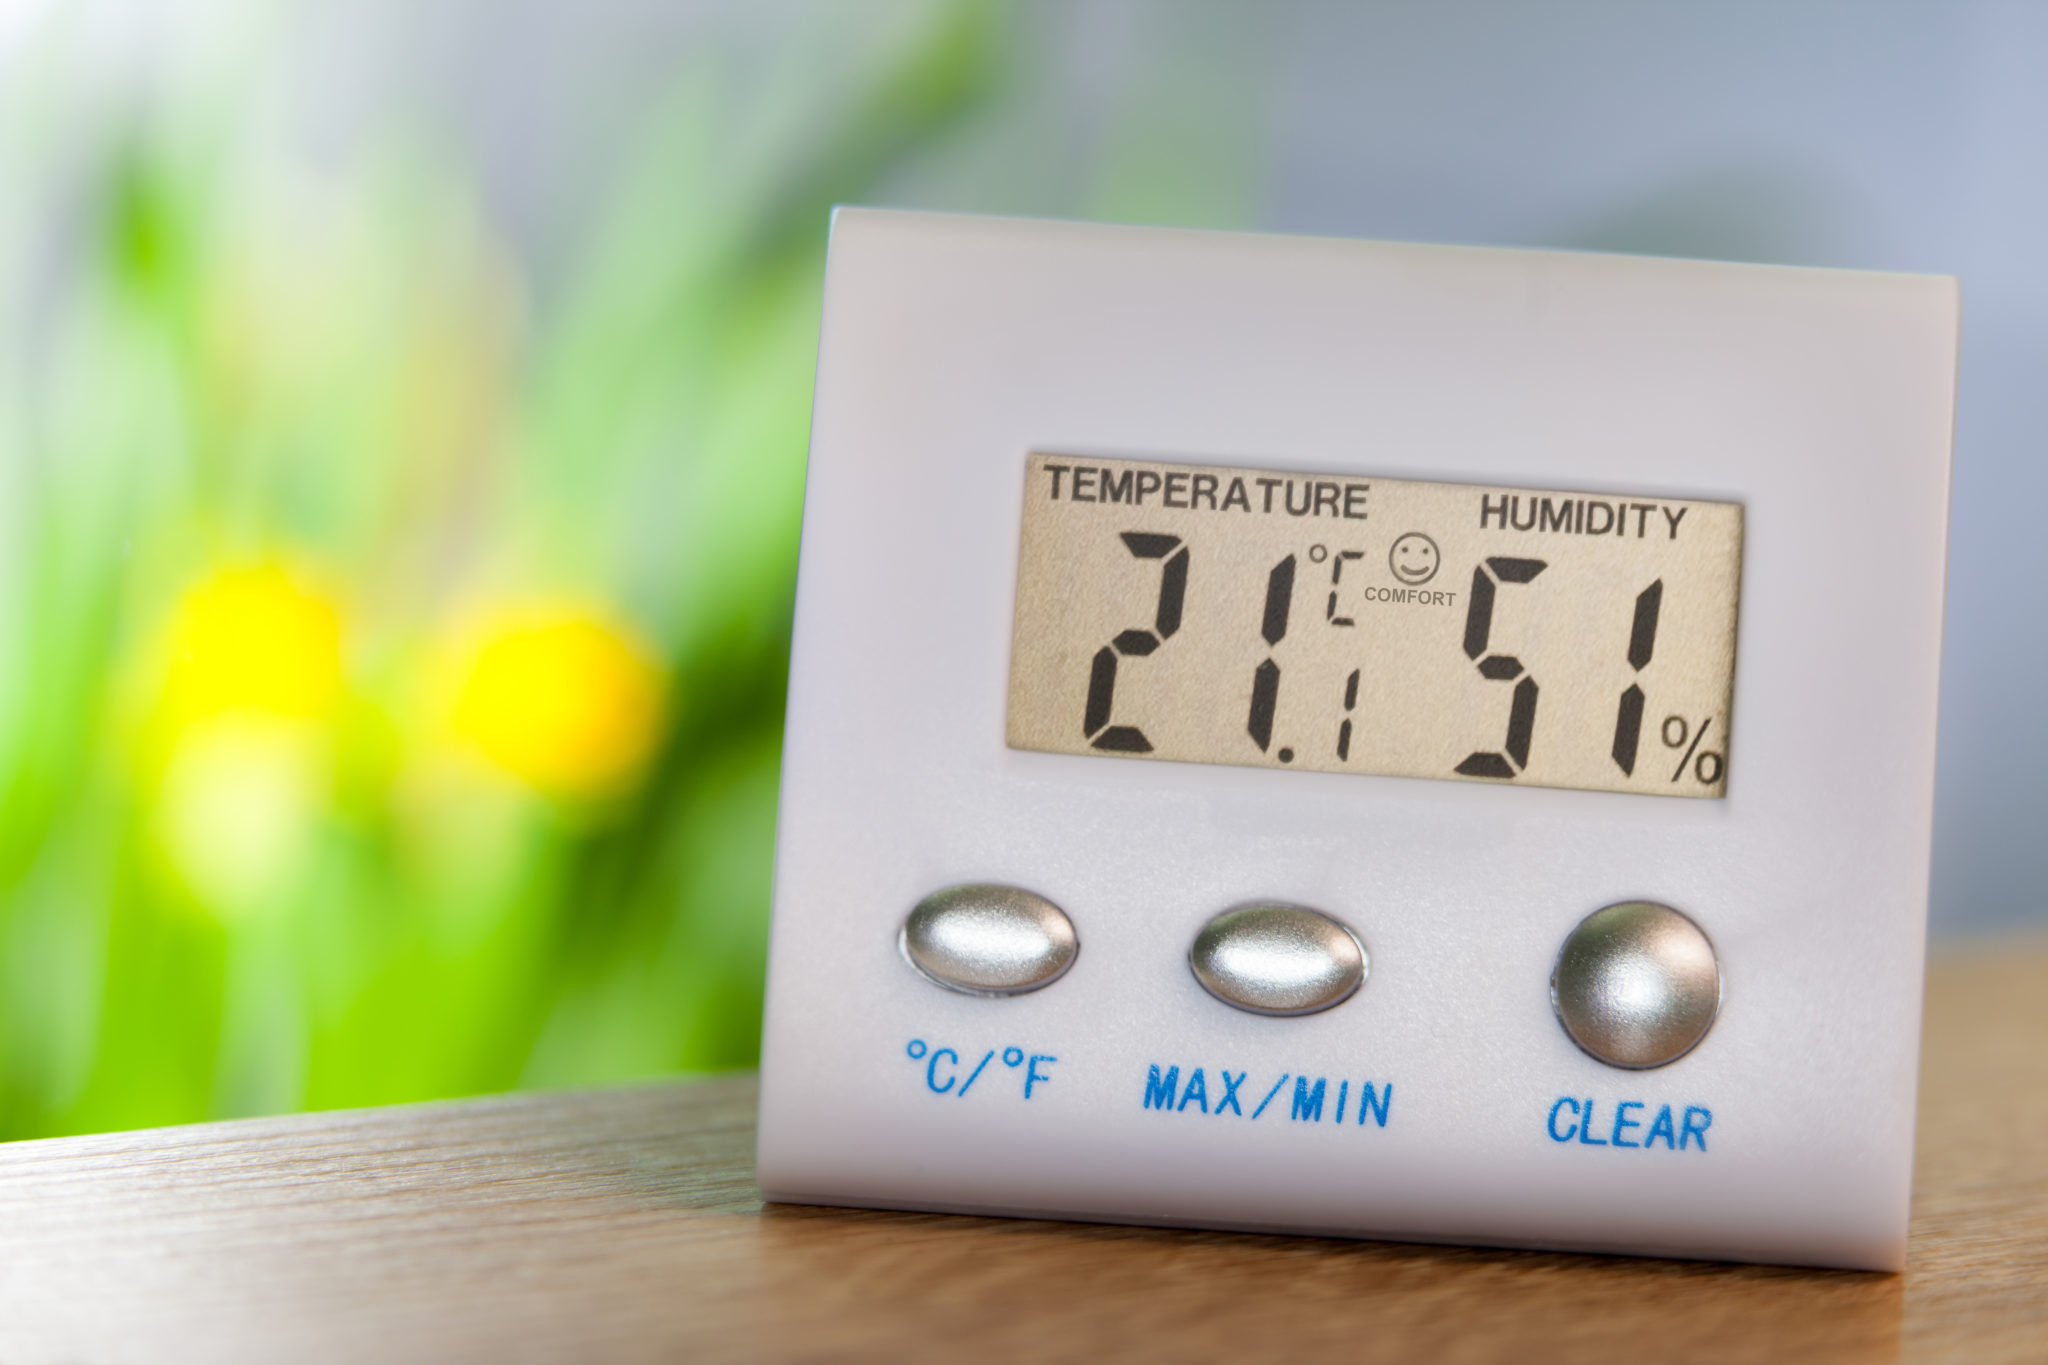 Outdoor Temperature And Indoor Humidity Chart